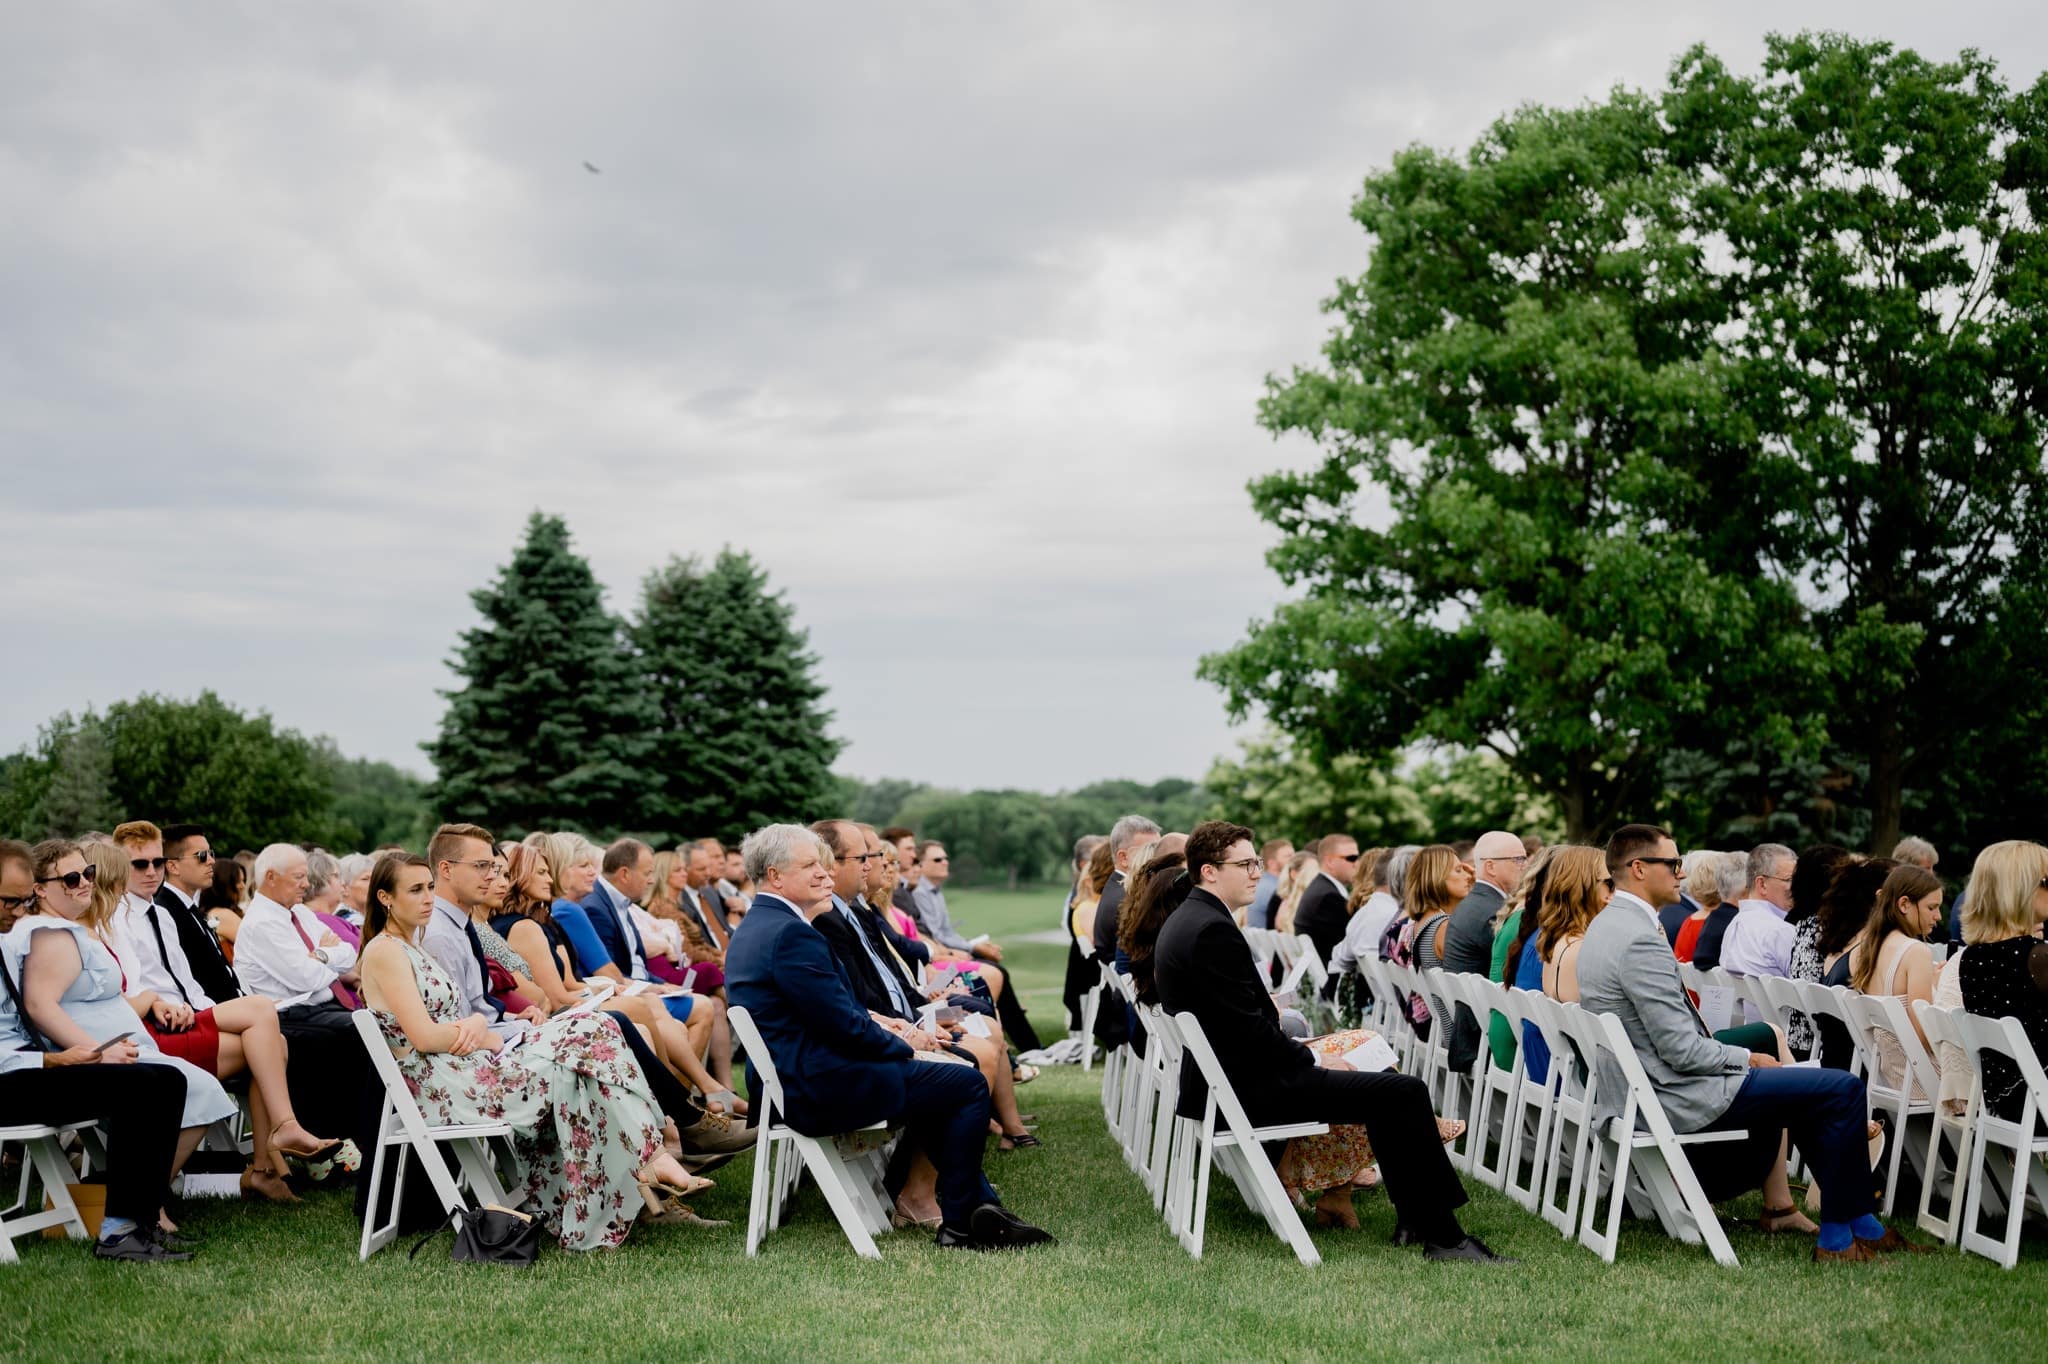 Des Moines Golf and Country Club wedding ceremony on course